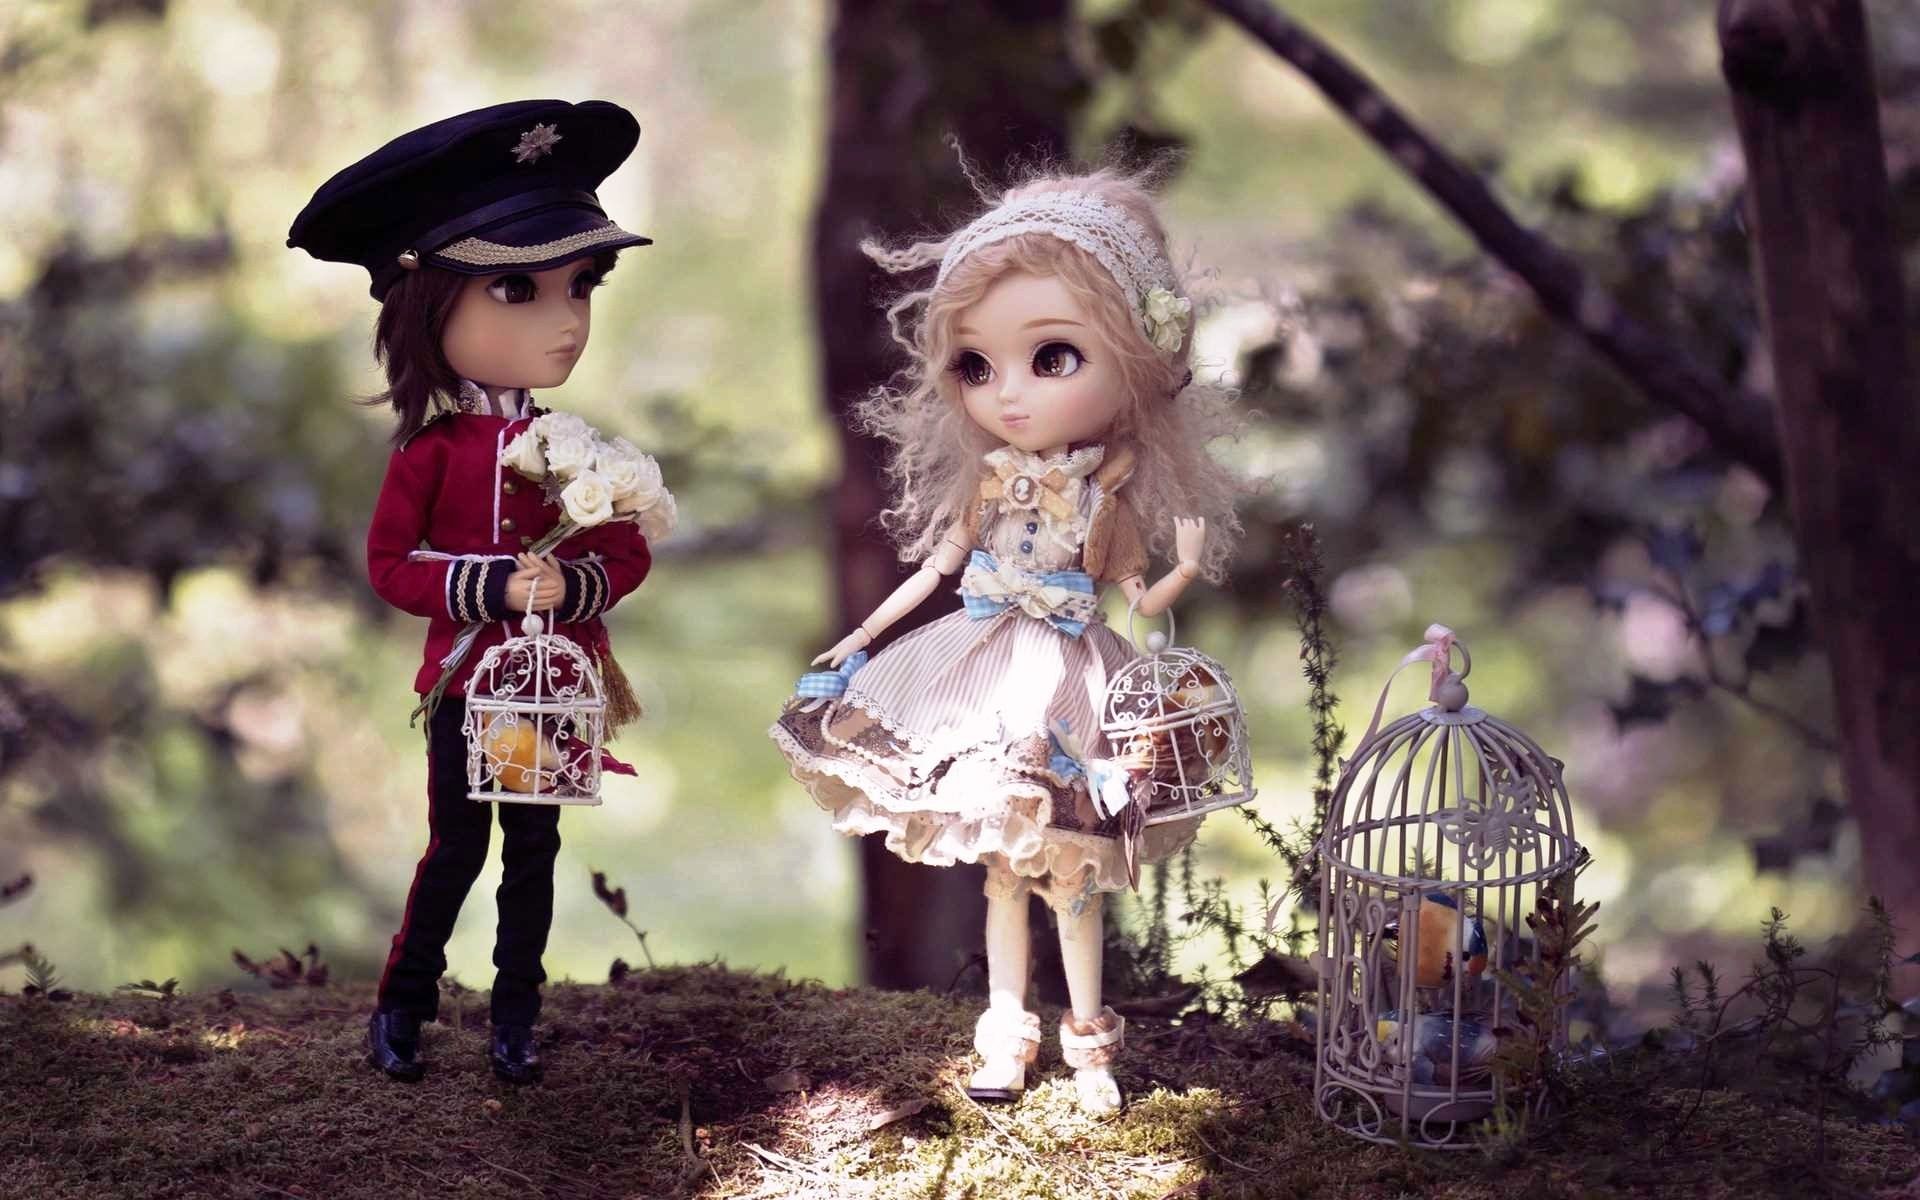 Couple Wallpaper Picture. Couples doll, Cute couple image, Cute dolls